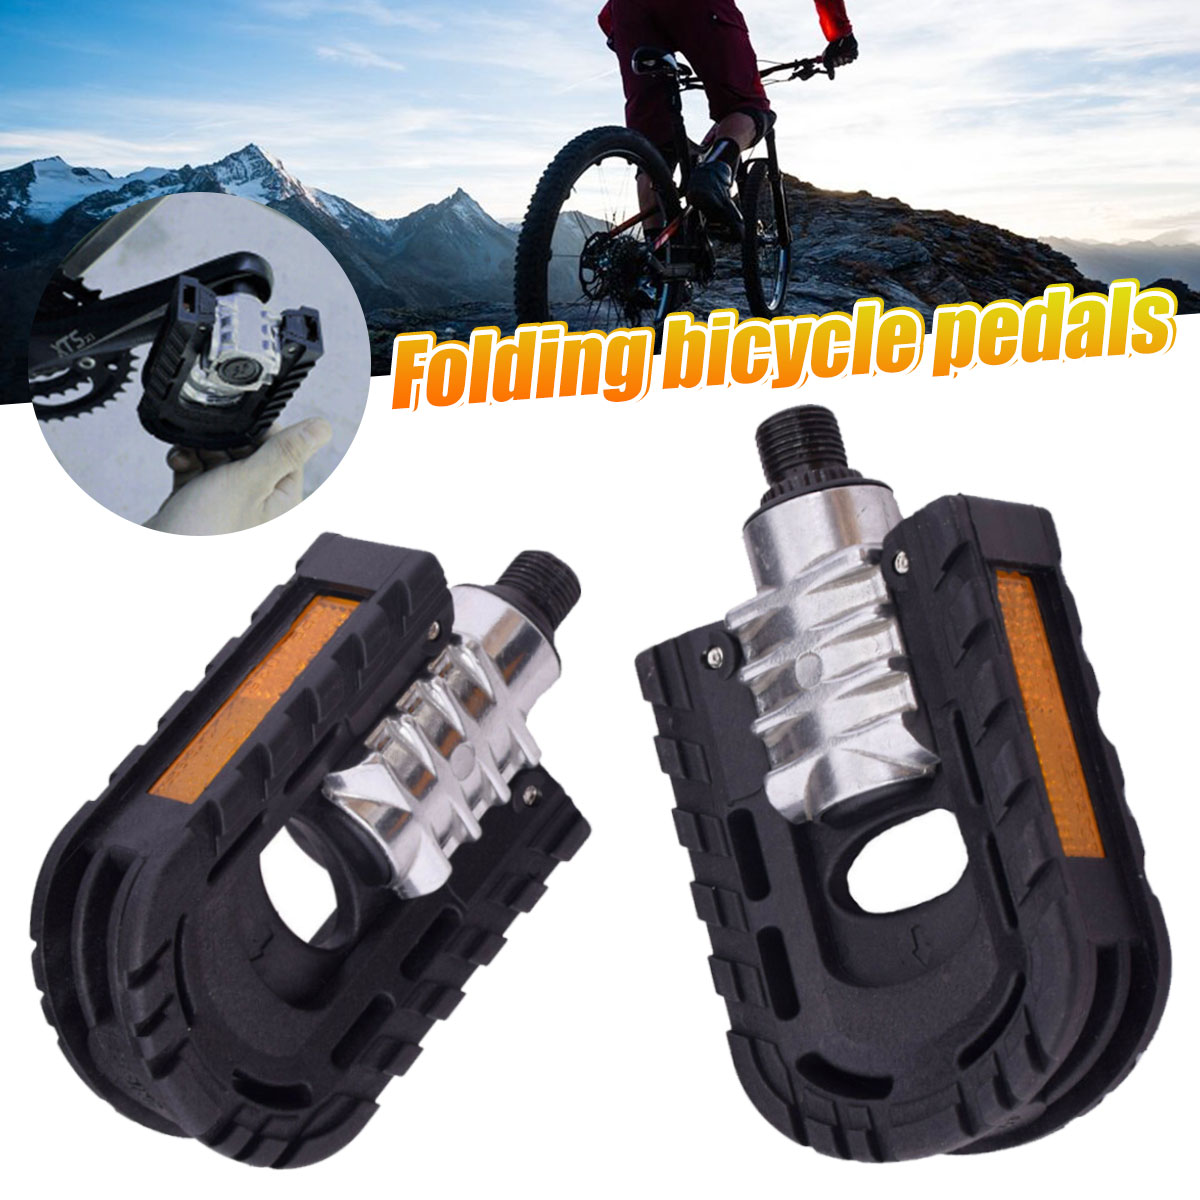 Details about   2PCS Aluminum Alloy Bike Pedals Foldable for Mountain Road Bicycle Cycling 14MM 